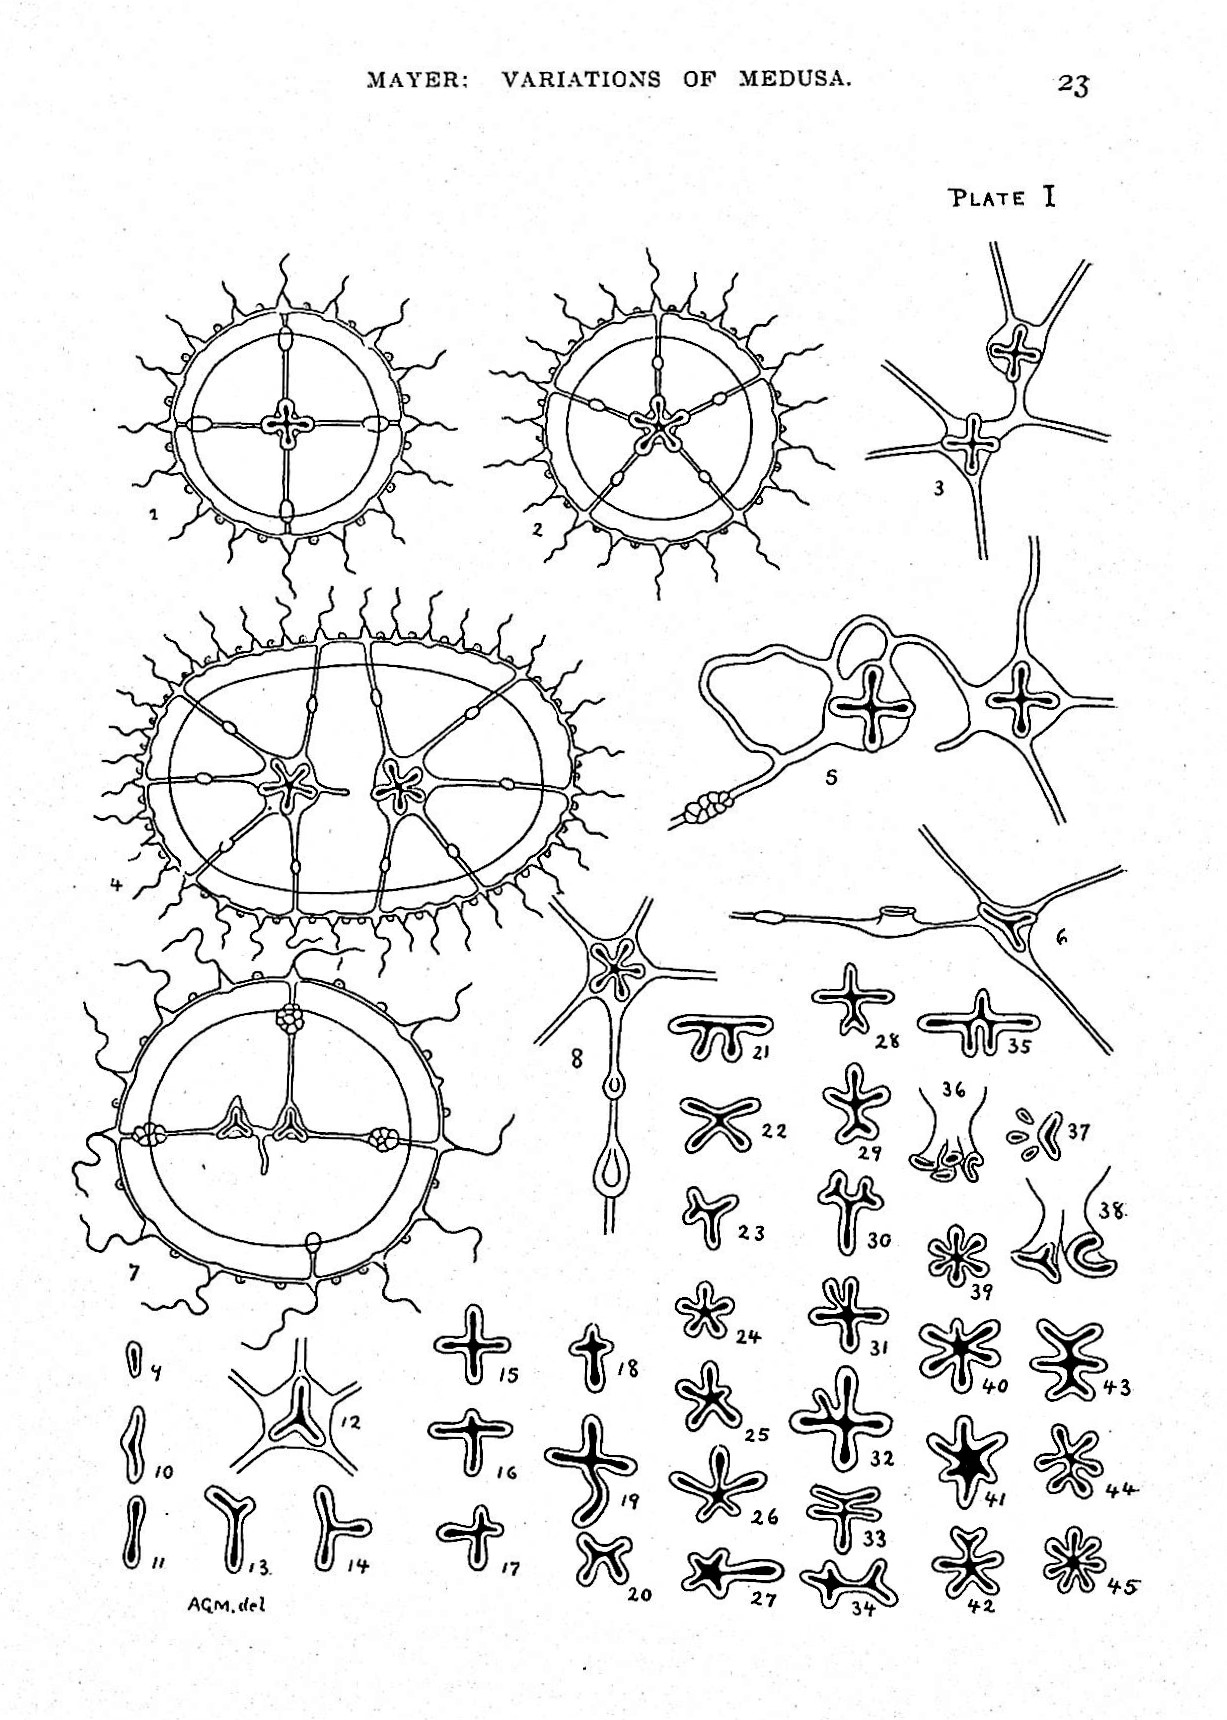 Image for Reports on the Scientific Results of the Expedition to the Tropical Pacific, in Charge of Alexander Agassiz, by the U. S. Fish Commission Steamer Albatross from August, 1899, to March, 1900, Commander Jefferson F Moser, U. S. N., Commanding. III. Medusae, TOGETHER WITH 4 additional monographs on medusae by A. G. Mayer